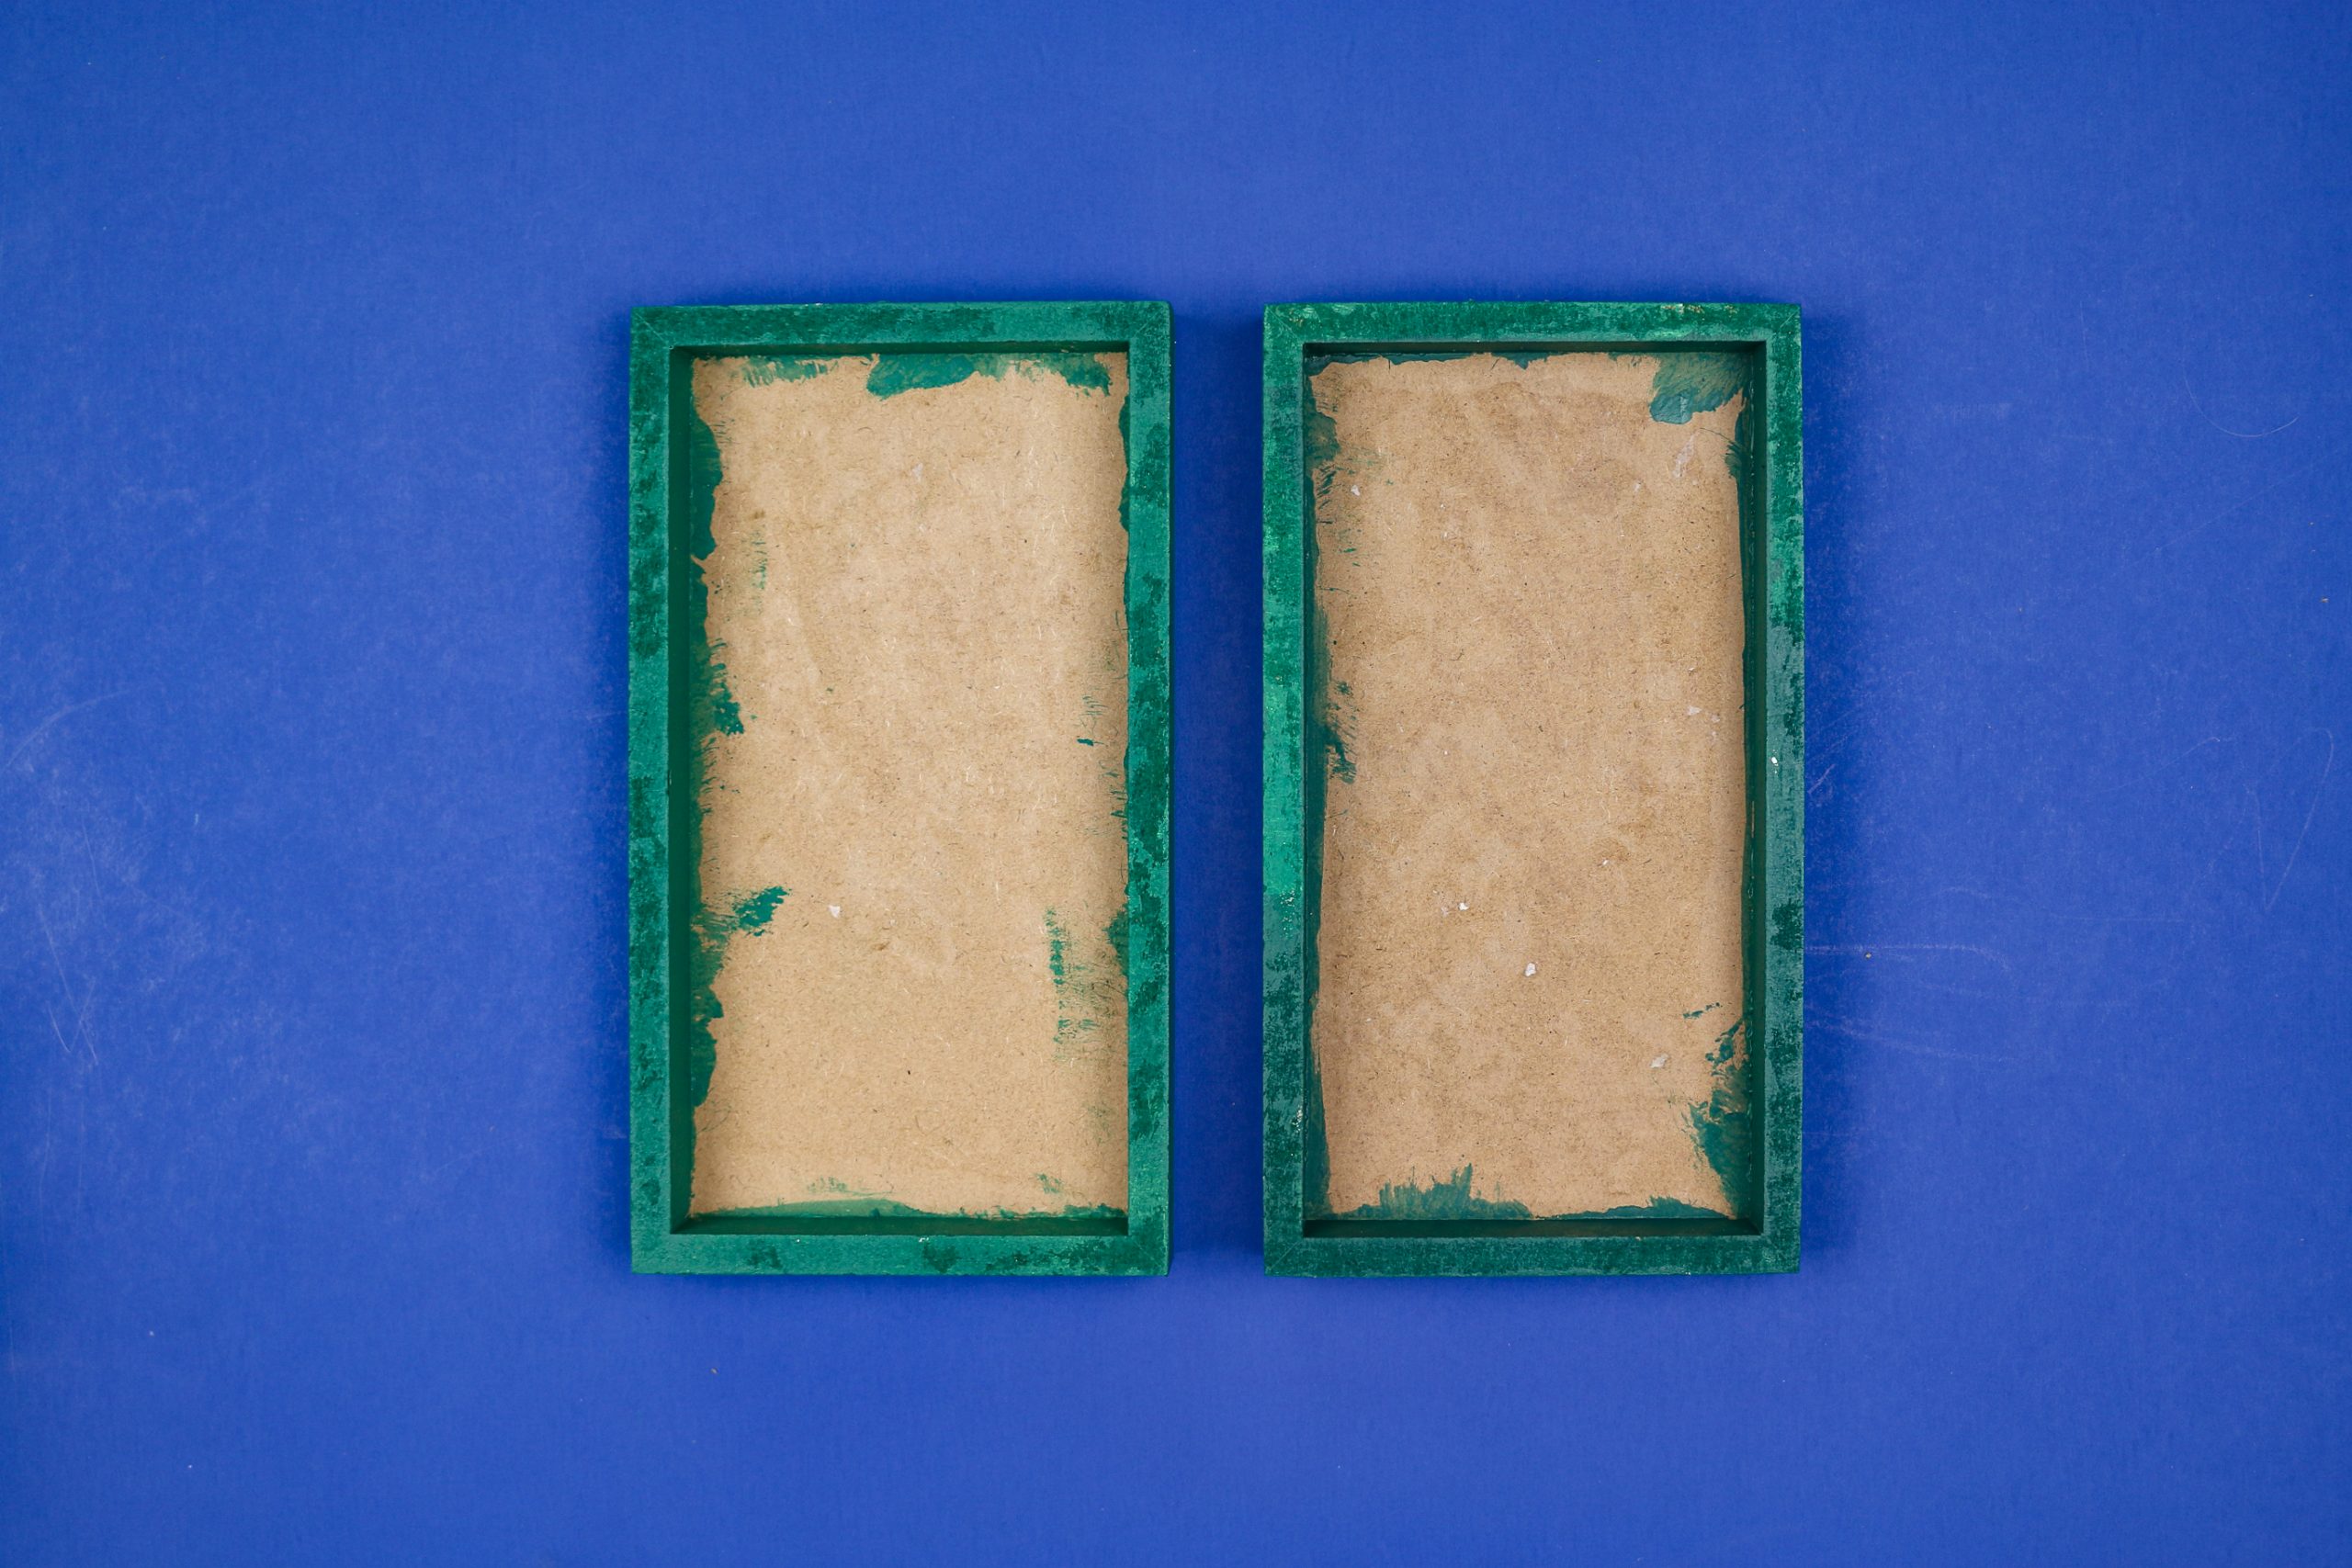 unfinished Green painted frames on a blue background